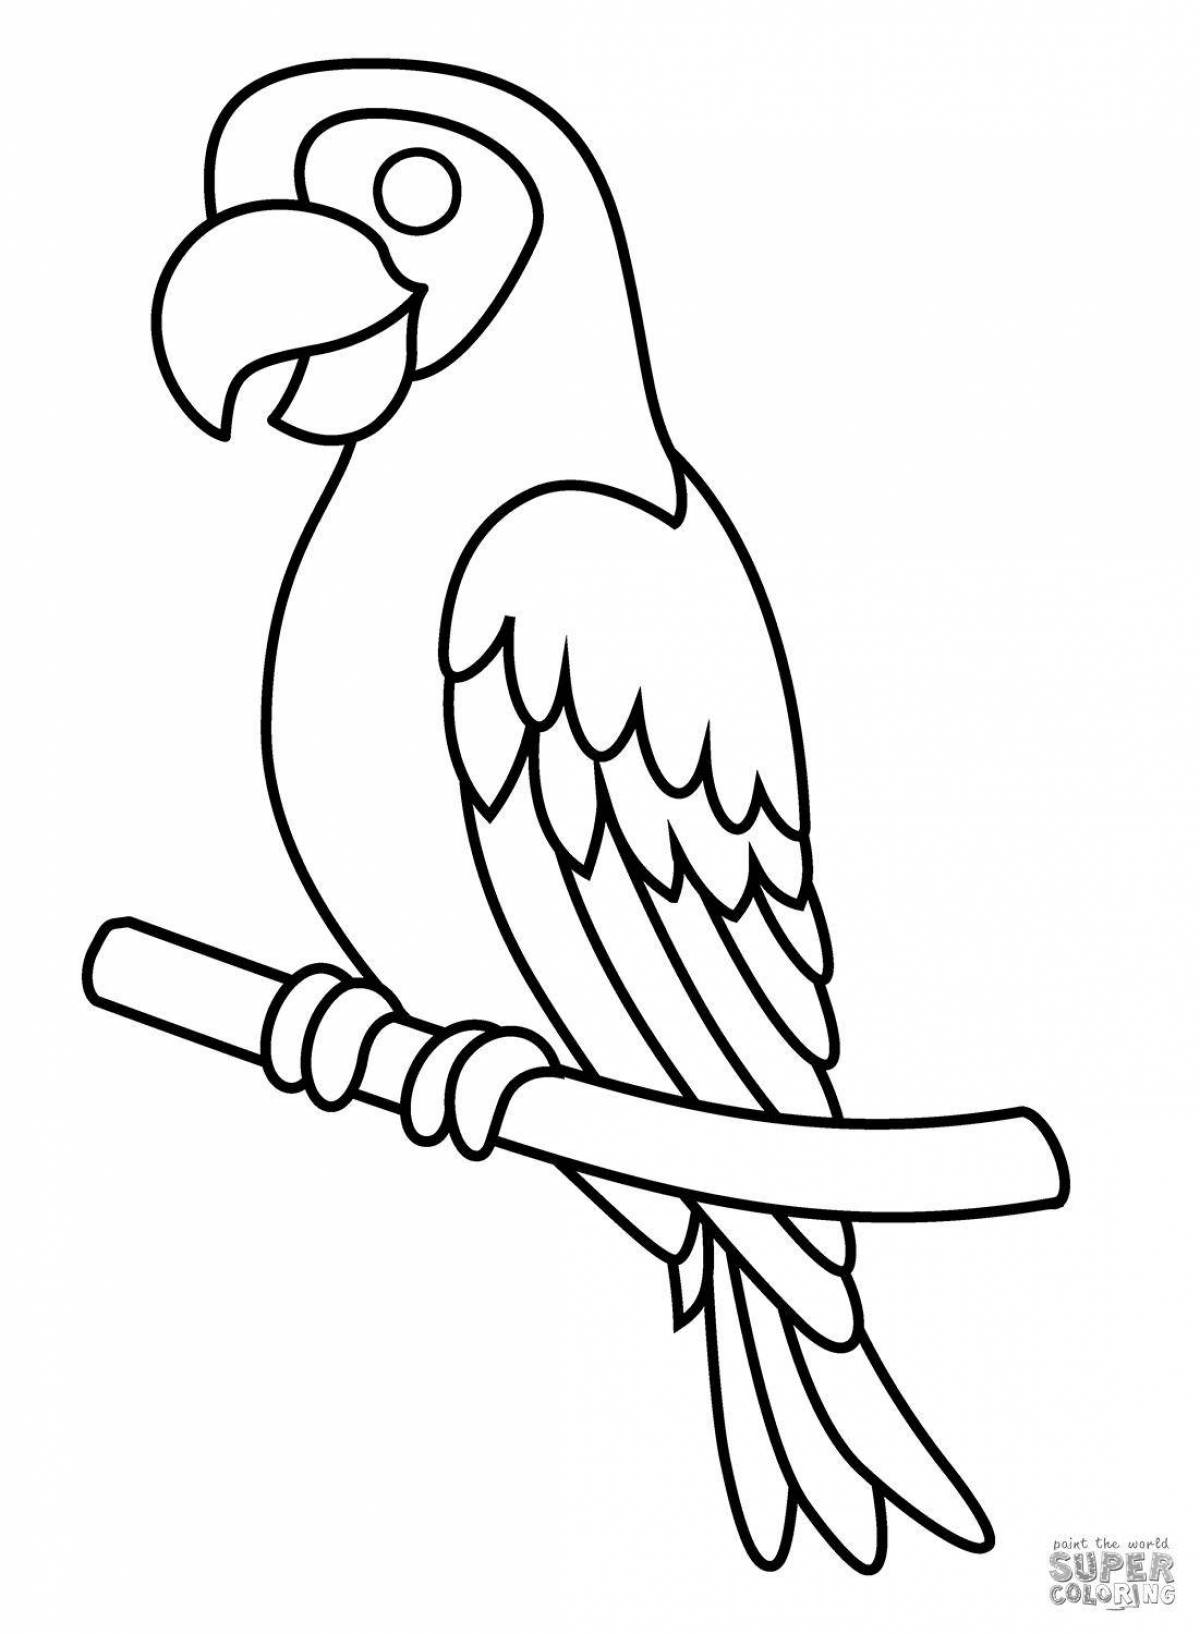 Fun coloring book parrot for 3-4 year olds